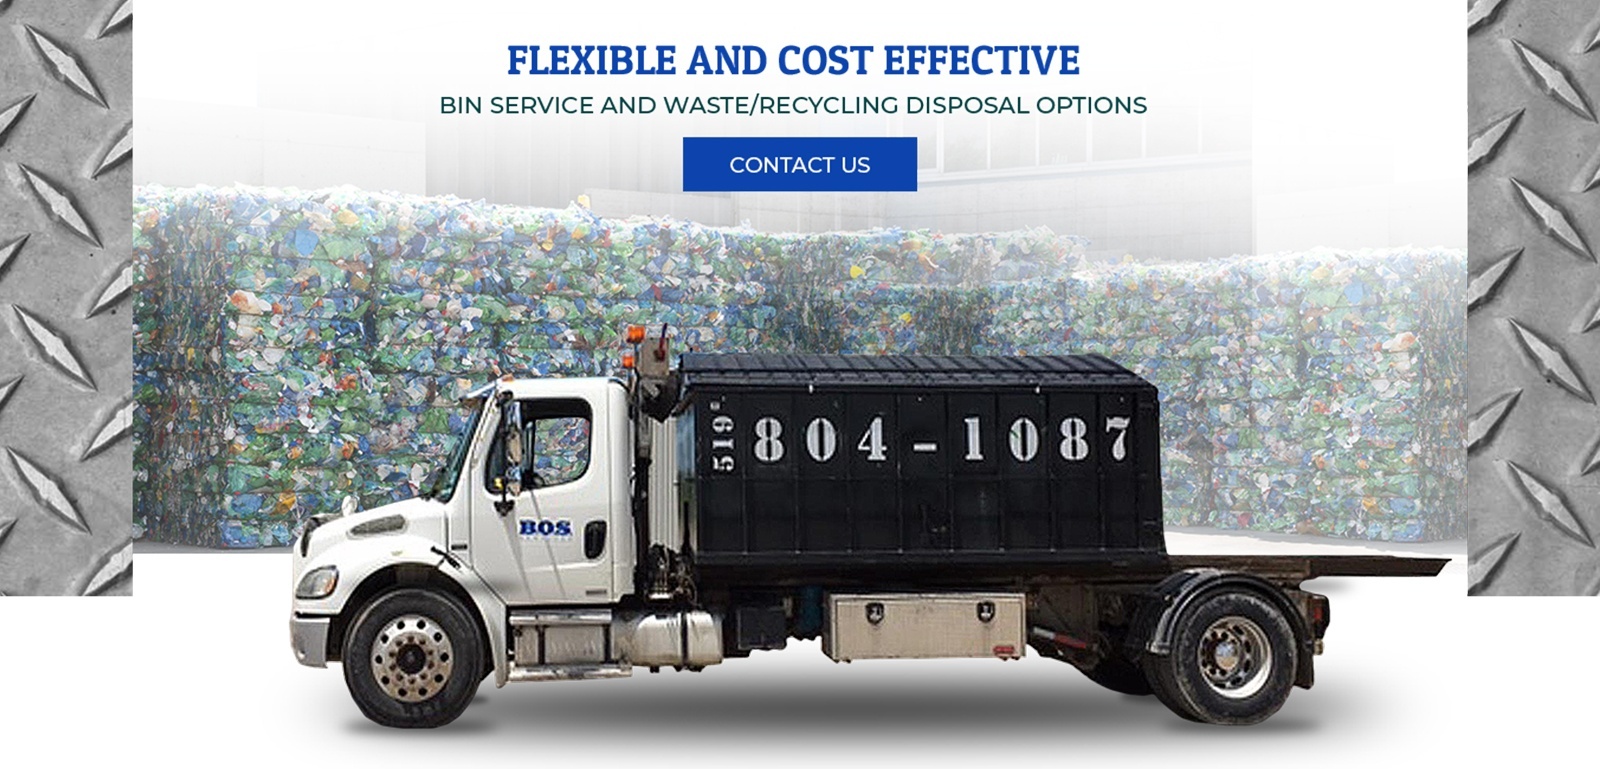 Flexible and Cost Effective - Bin Service and Waste, Recycling Disposal Options by BOS Services Inc.